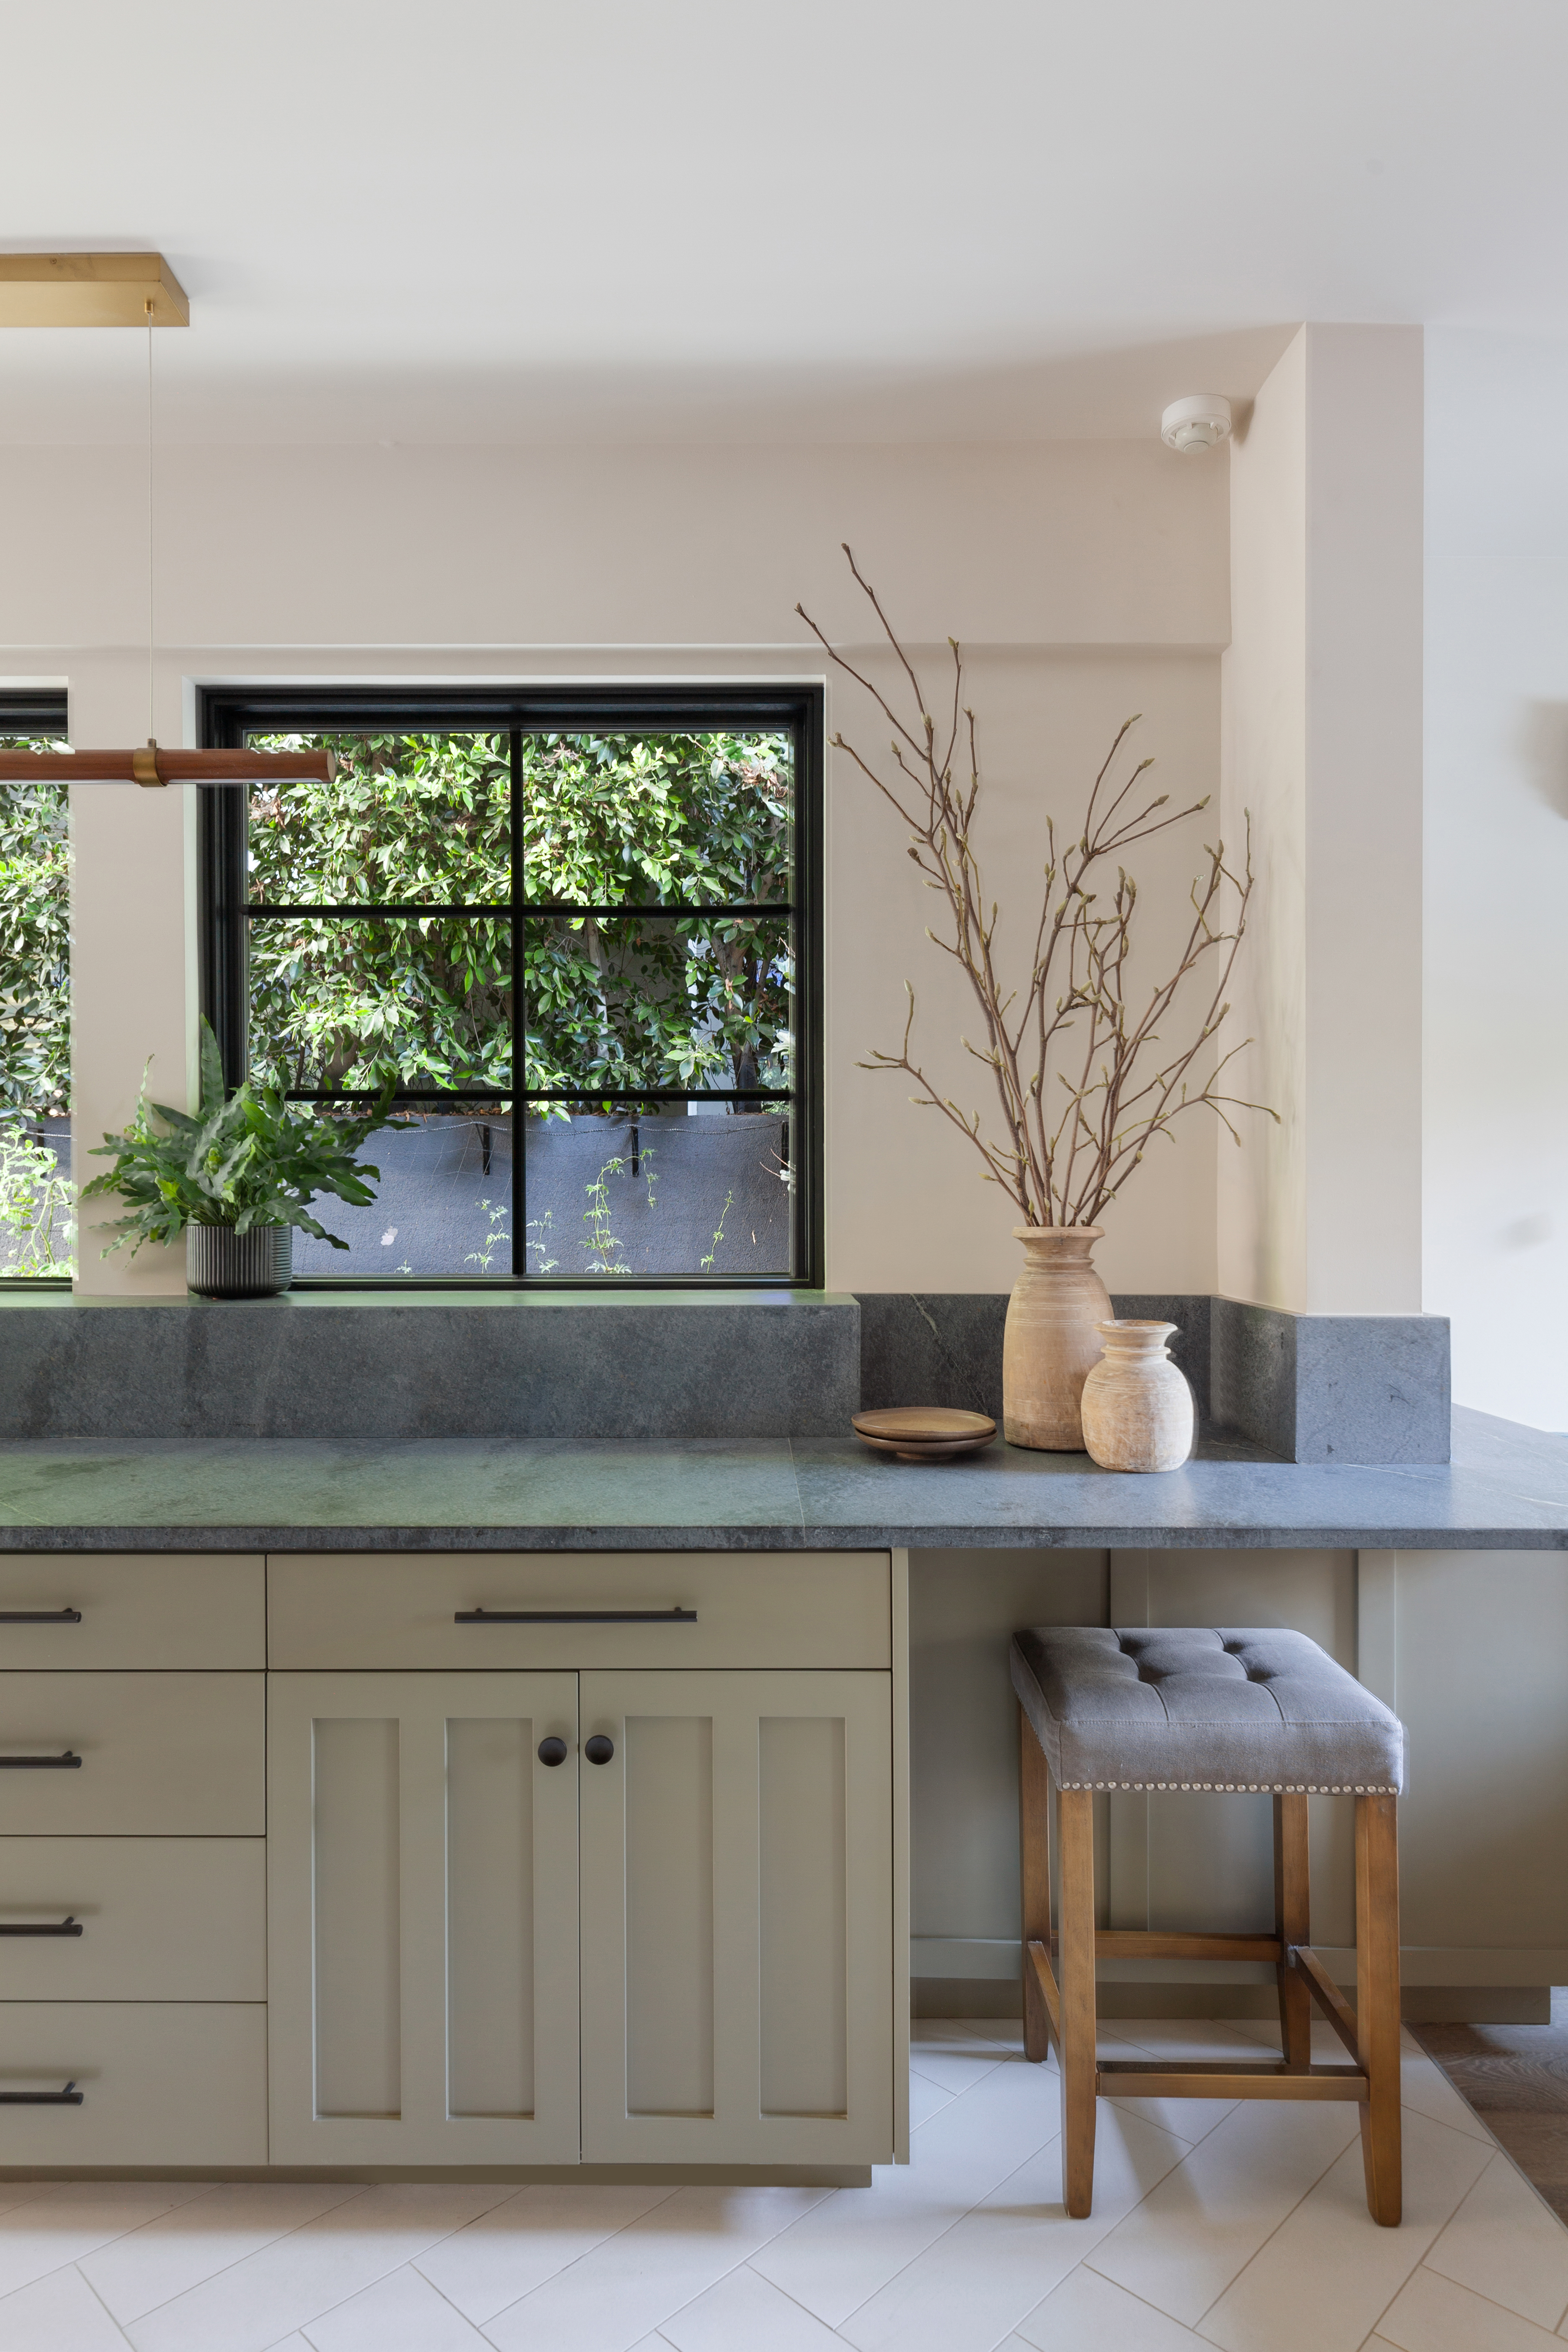 House & Home - Browse Beautiful Kitchen Countertops Inspired by Nature